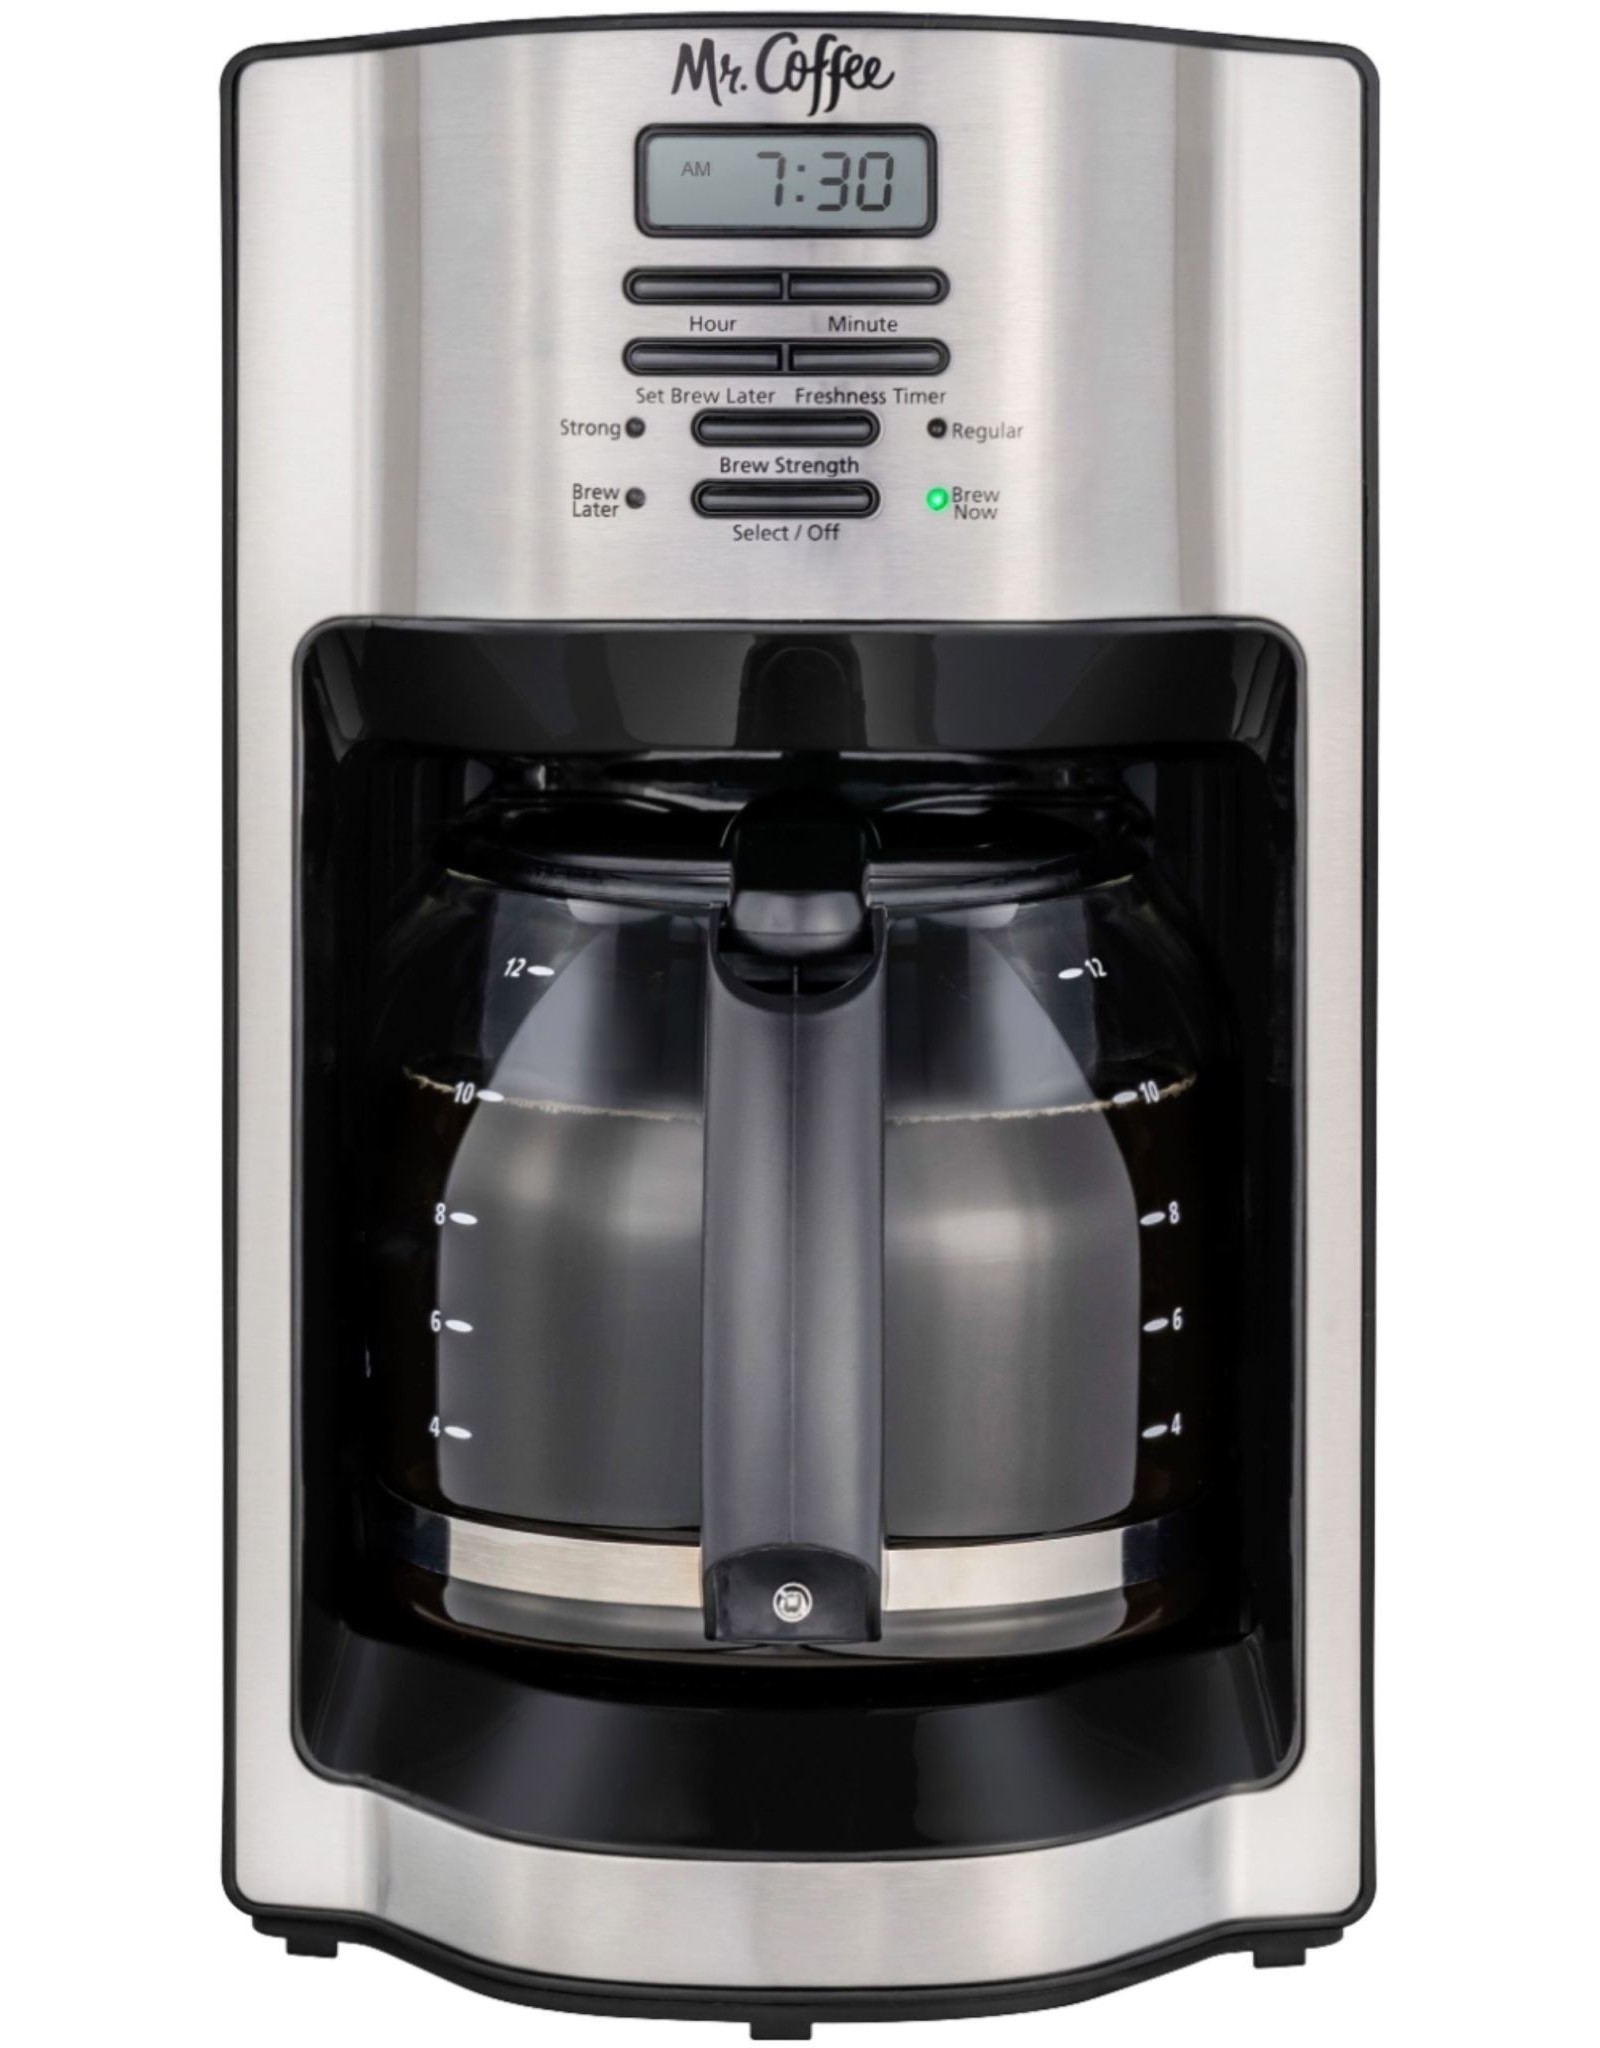 mr. coffee 2121121 Mr. Coffee - 12-Cup Coffee Maker with Rapid Brew System - Stainless Steel